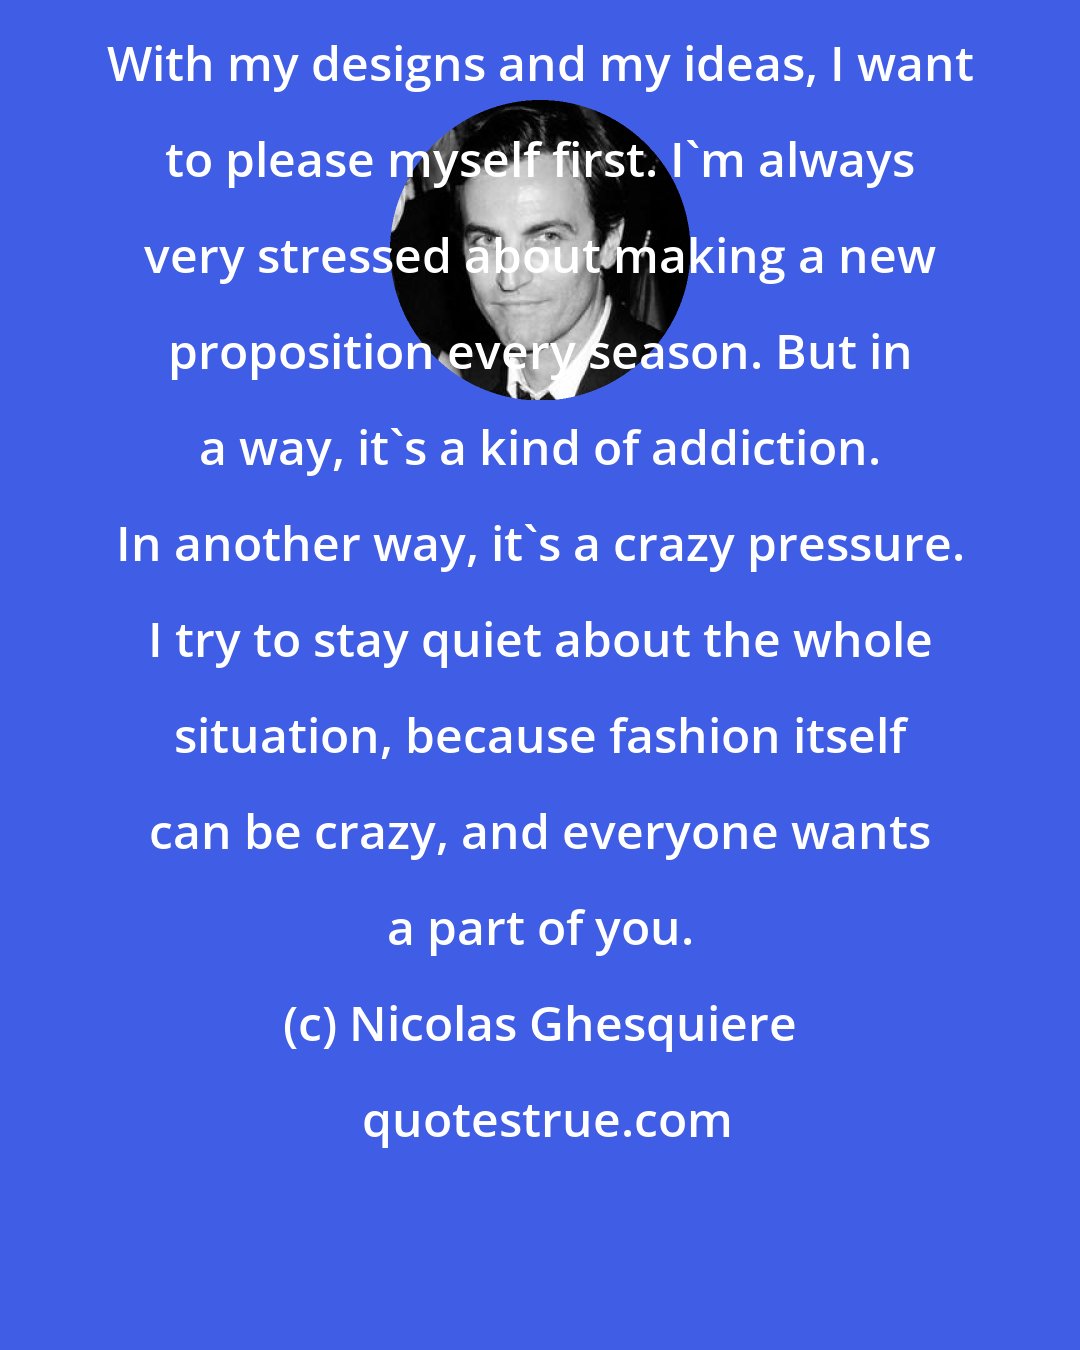 Nicolas Ghesquiere: With my designs and my ideas, I want to please myself first. I'm always very stressed about making a new proposition every season. But in a way, it's a kind of addiction. In another way, it's a crazy pressure. I try to stay quiet about the whole situation, because fashion itself can be crazy, and everyone wants a part of you.